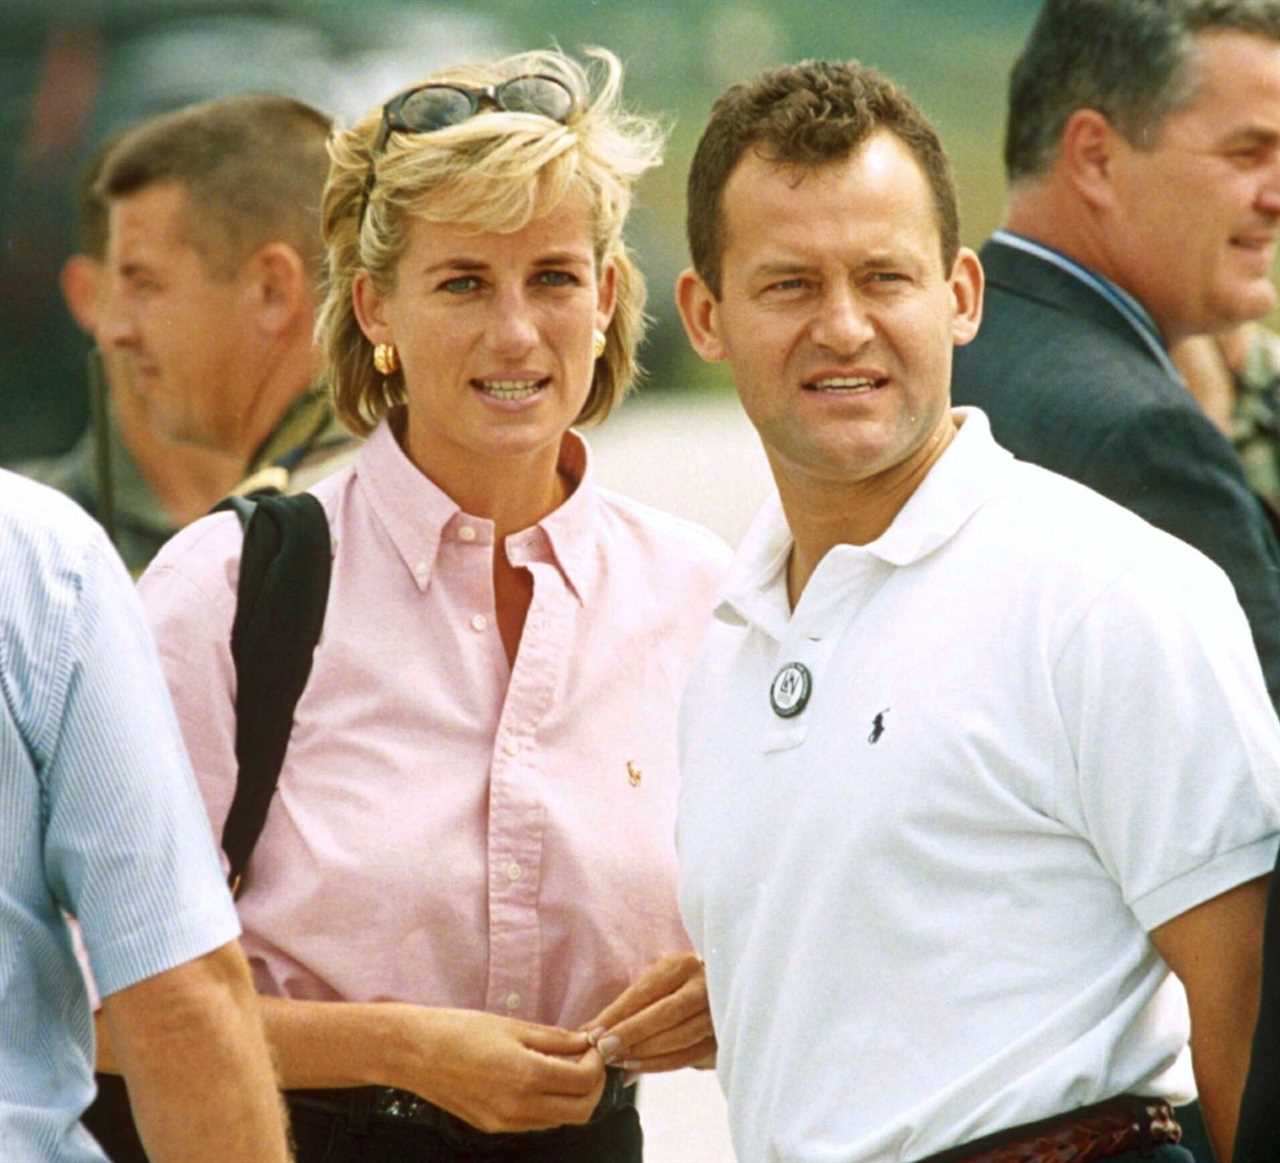 Prince Harry blasts Paul Burrell for ‘milking’ Diana’s death for money and says butler’s tell-all ‘made his blood boil’